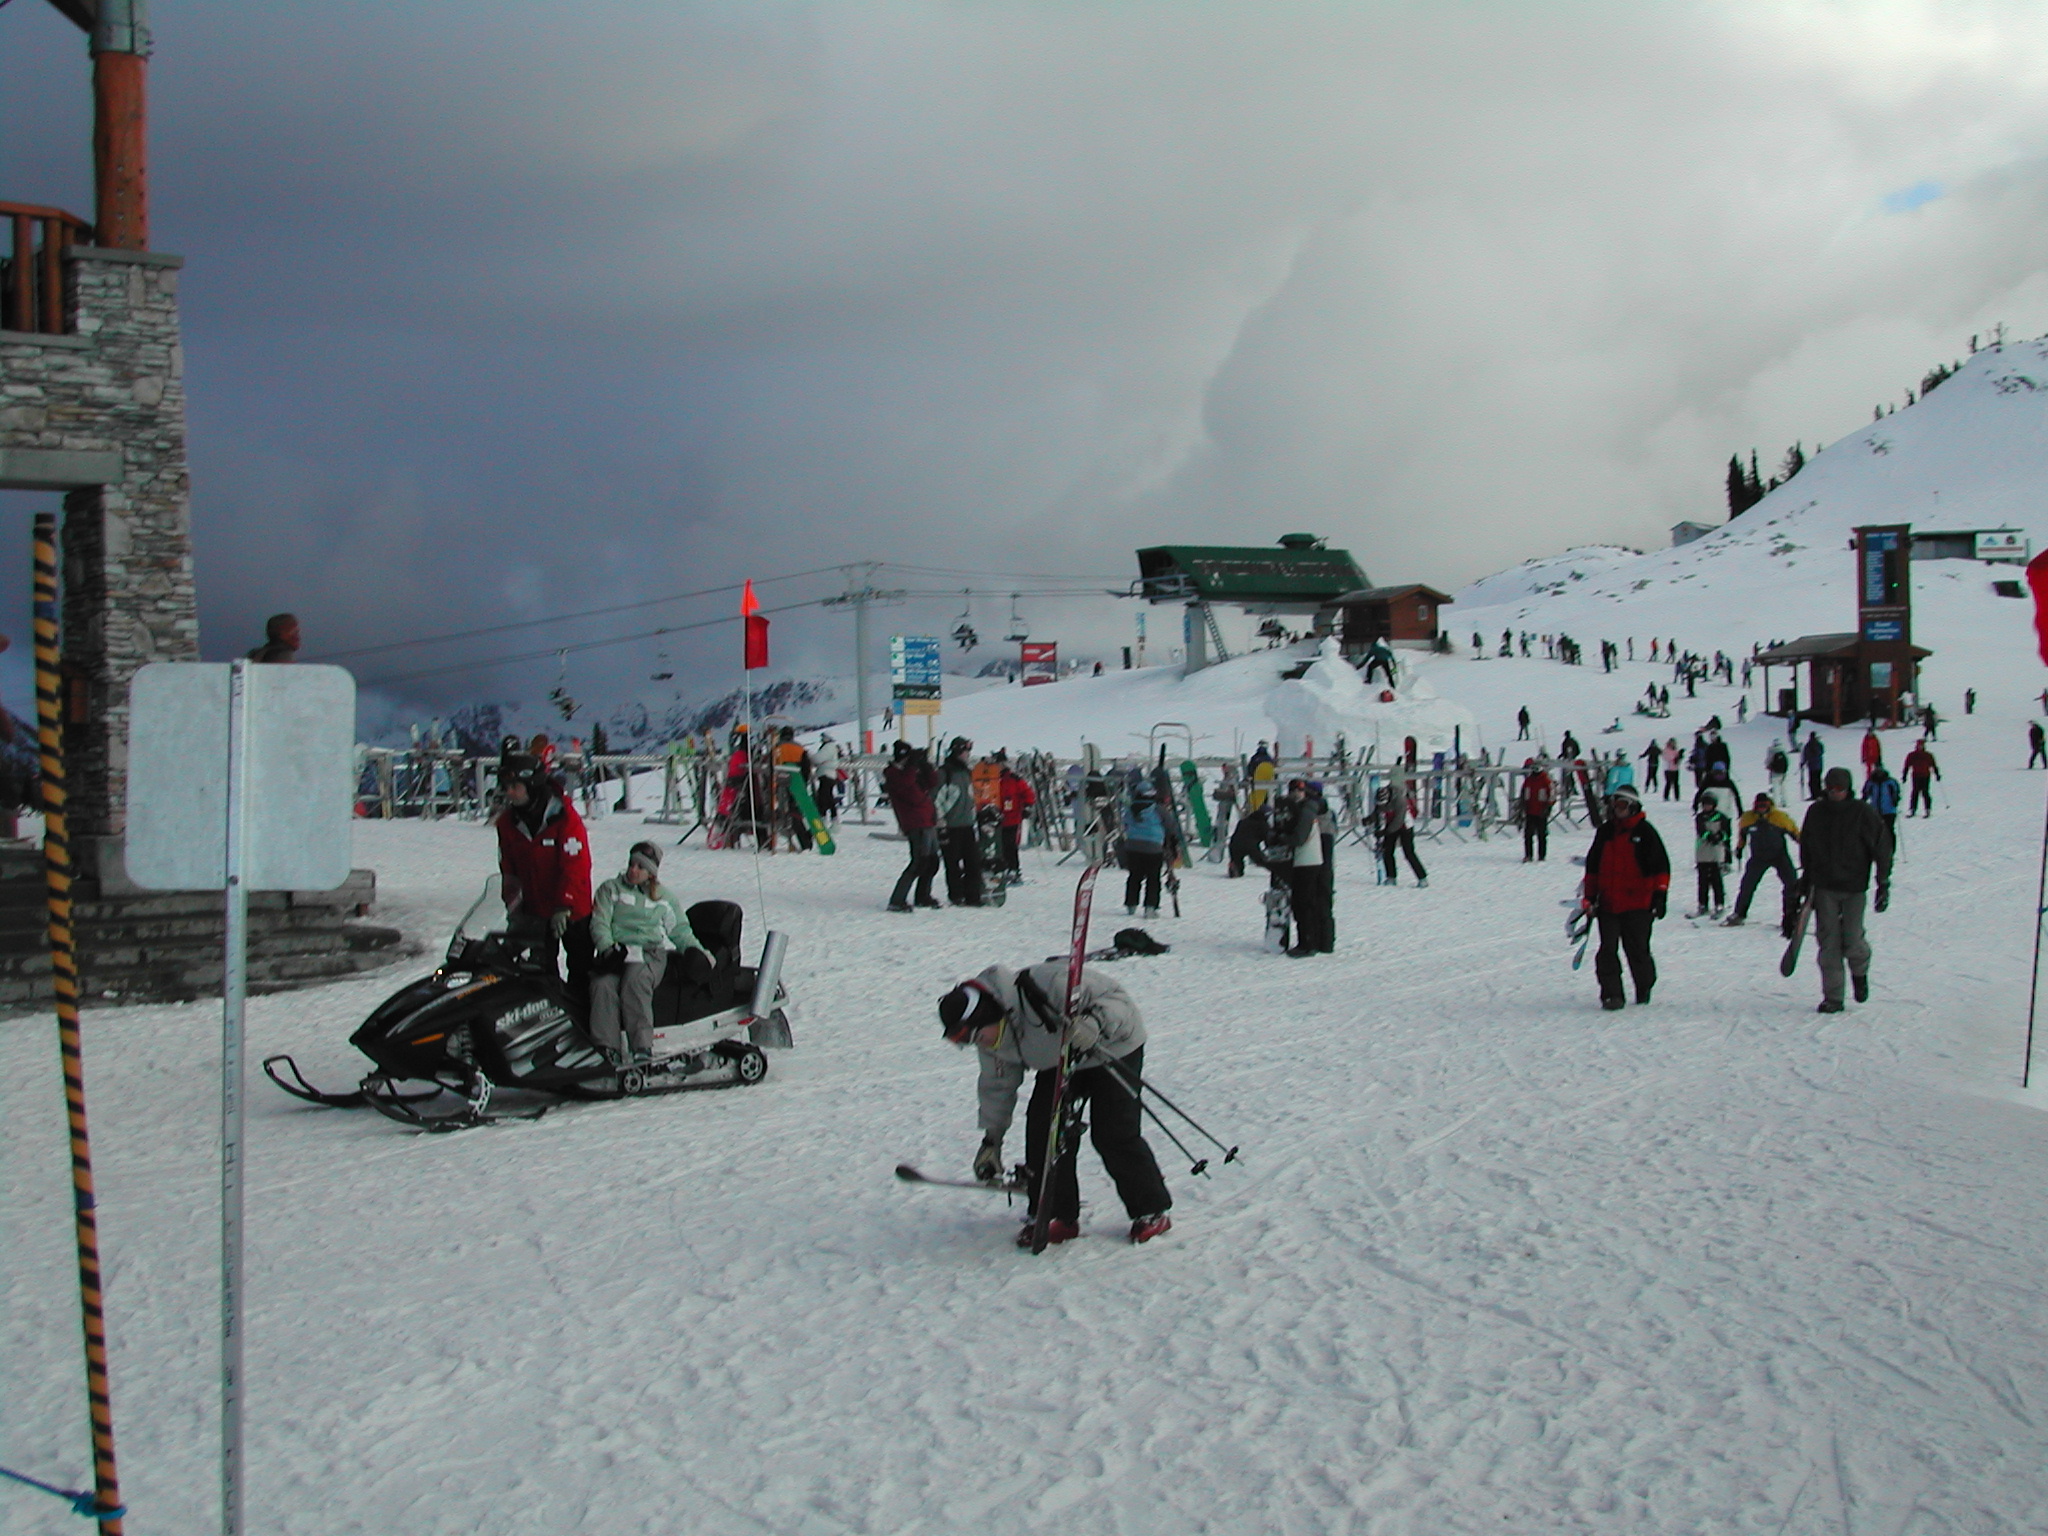 skiers gather on the snow with some of their gear